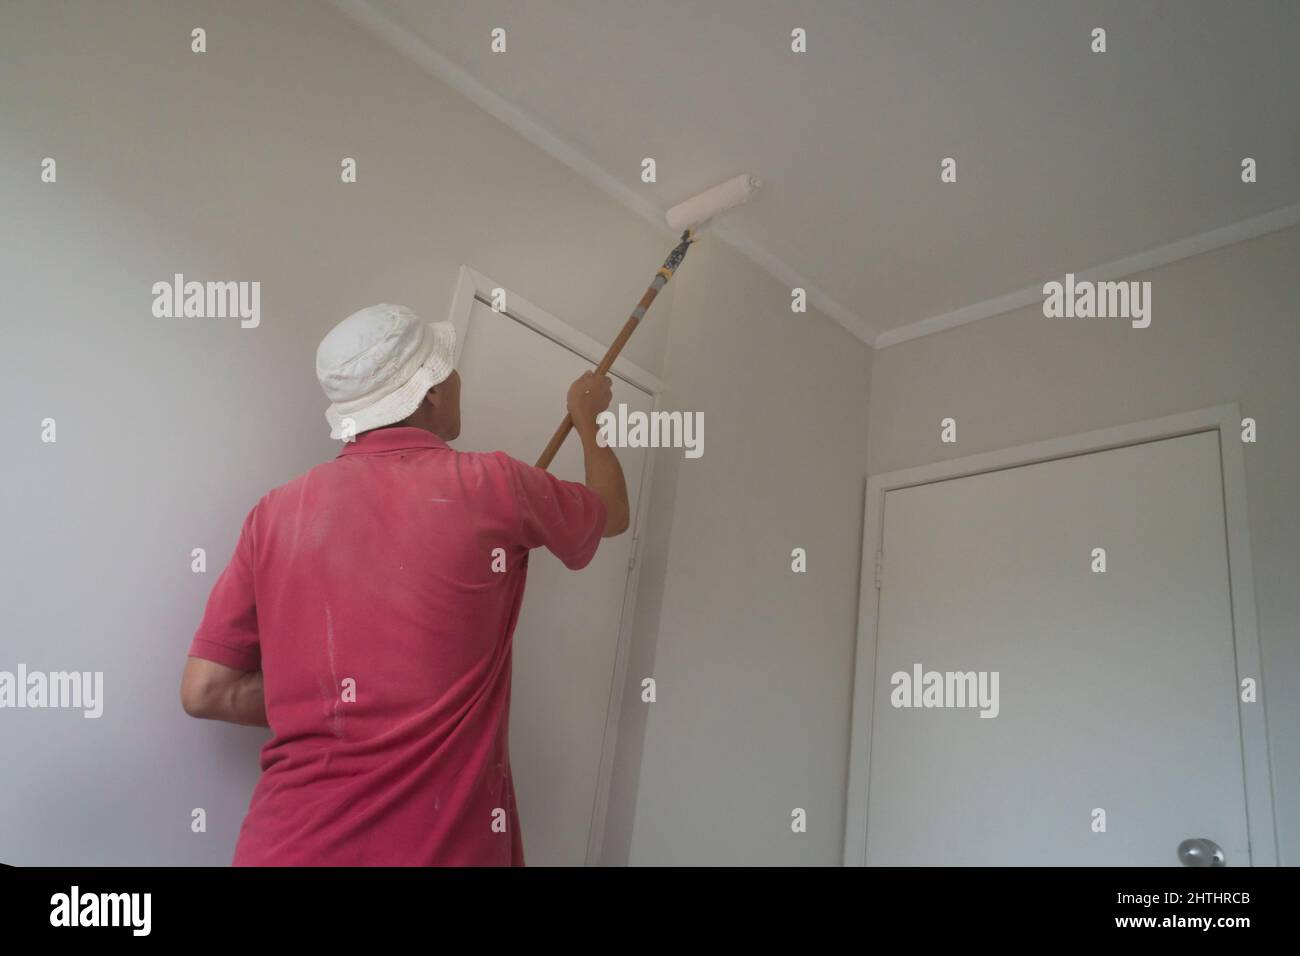 https://c8.alamy.com/comp/2HTHRCB/man-painting-ceiling-with-a-roller-in-new-home-2HTHRCB.jpg